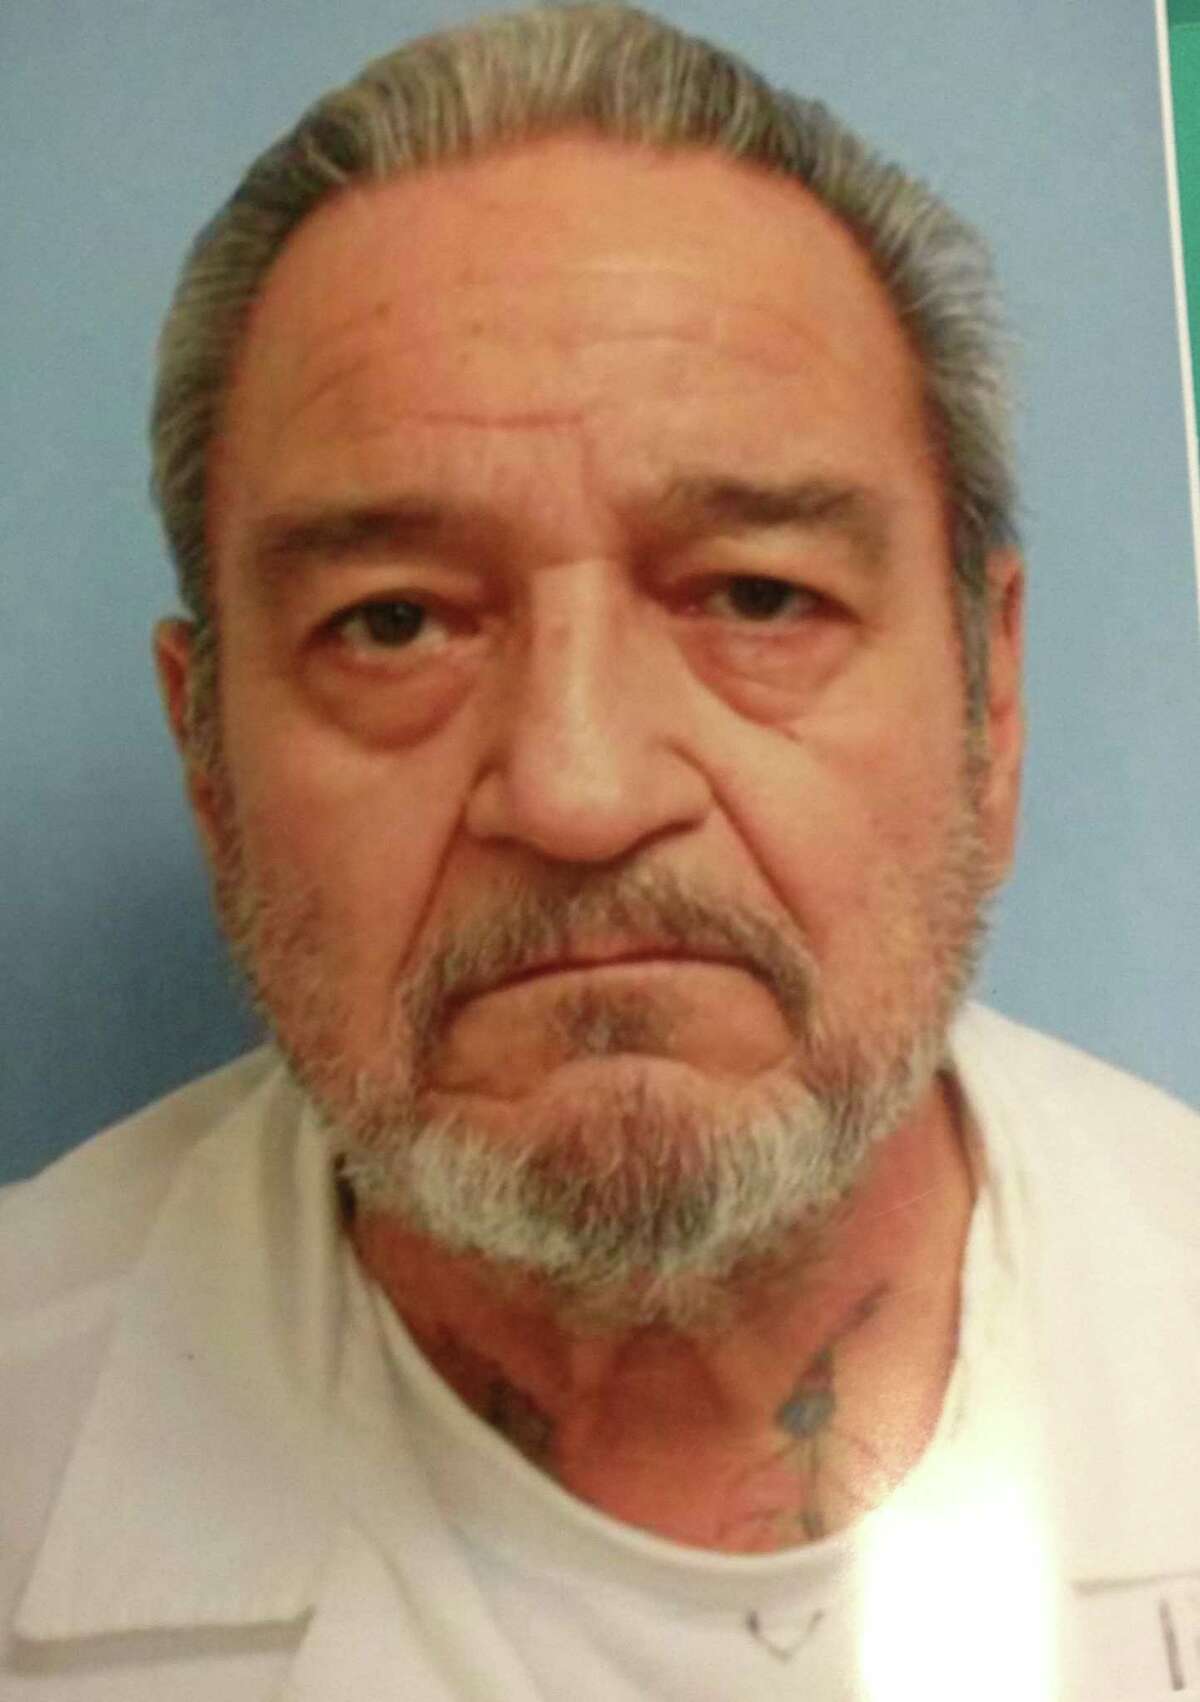 Alice Police Chief Rex Ramon on Monday announced the arrest of Roberto Lopez, 70, in the murder of Matt Murphy, who died of gunshot wounds in a murder unsolved for more than 40 years.